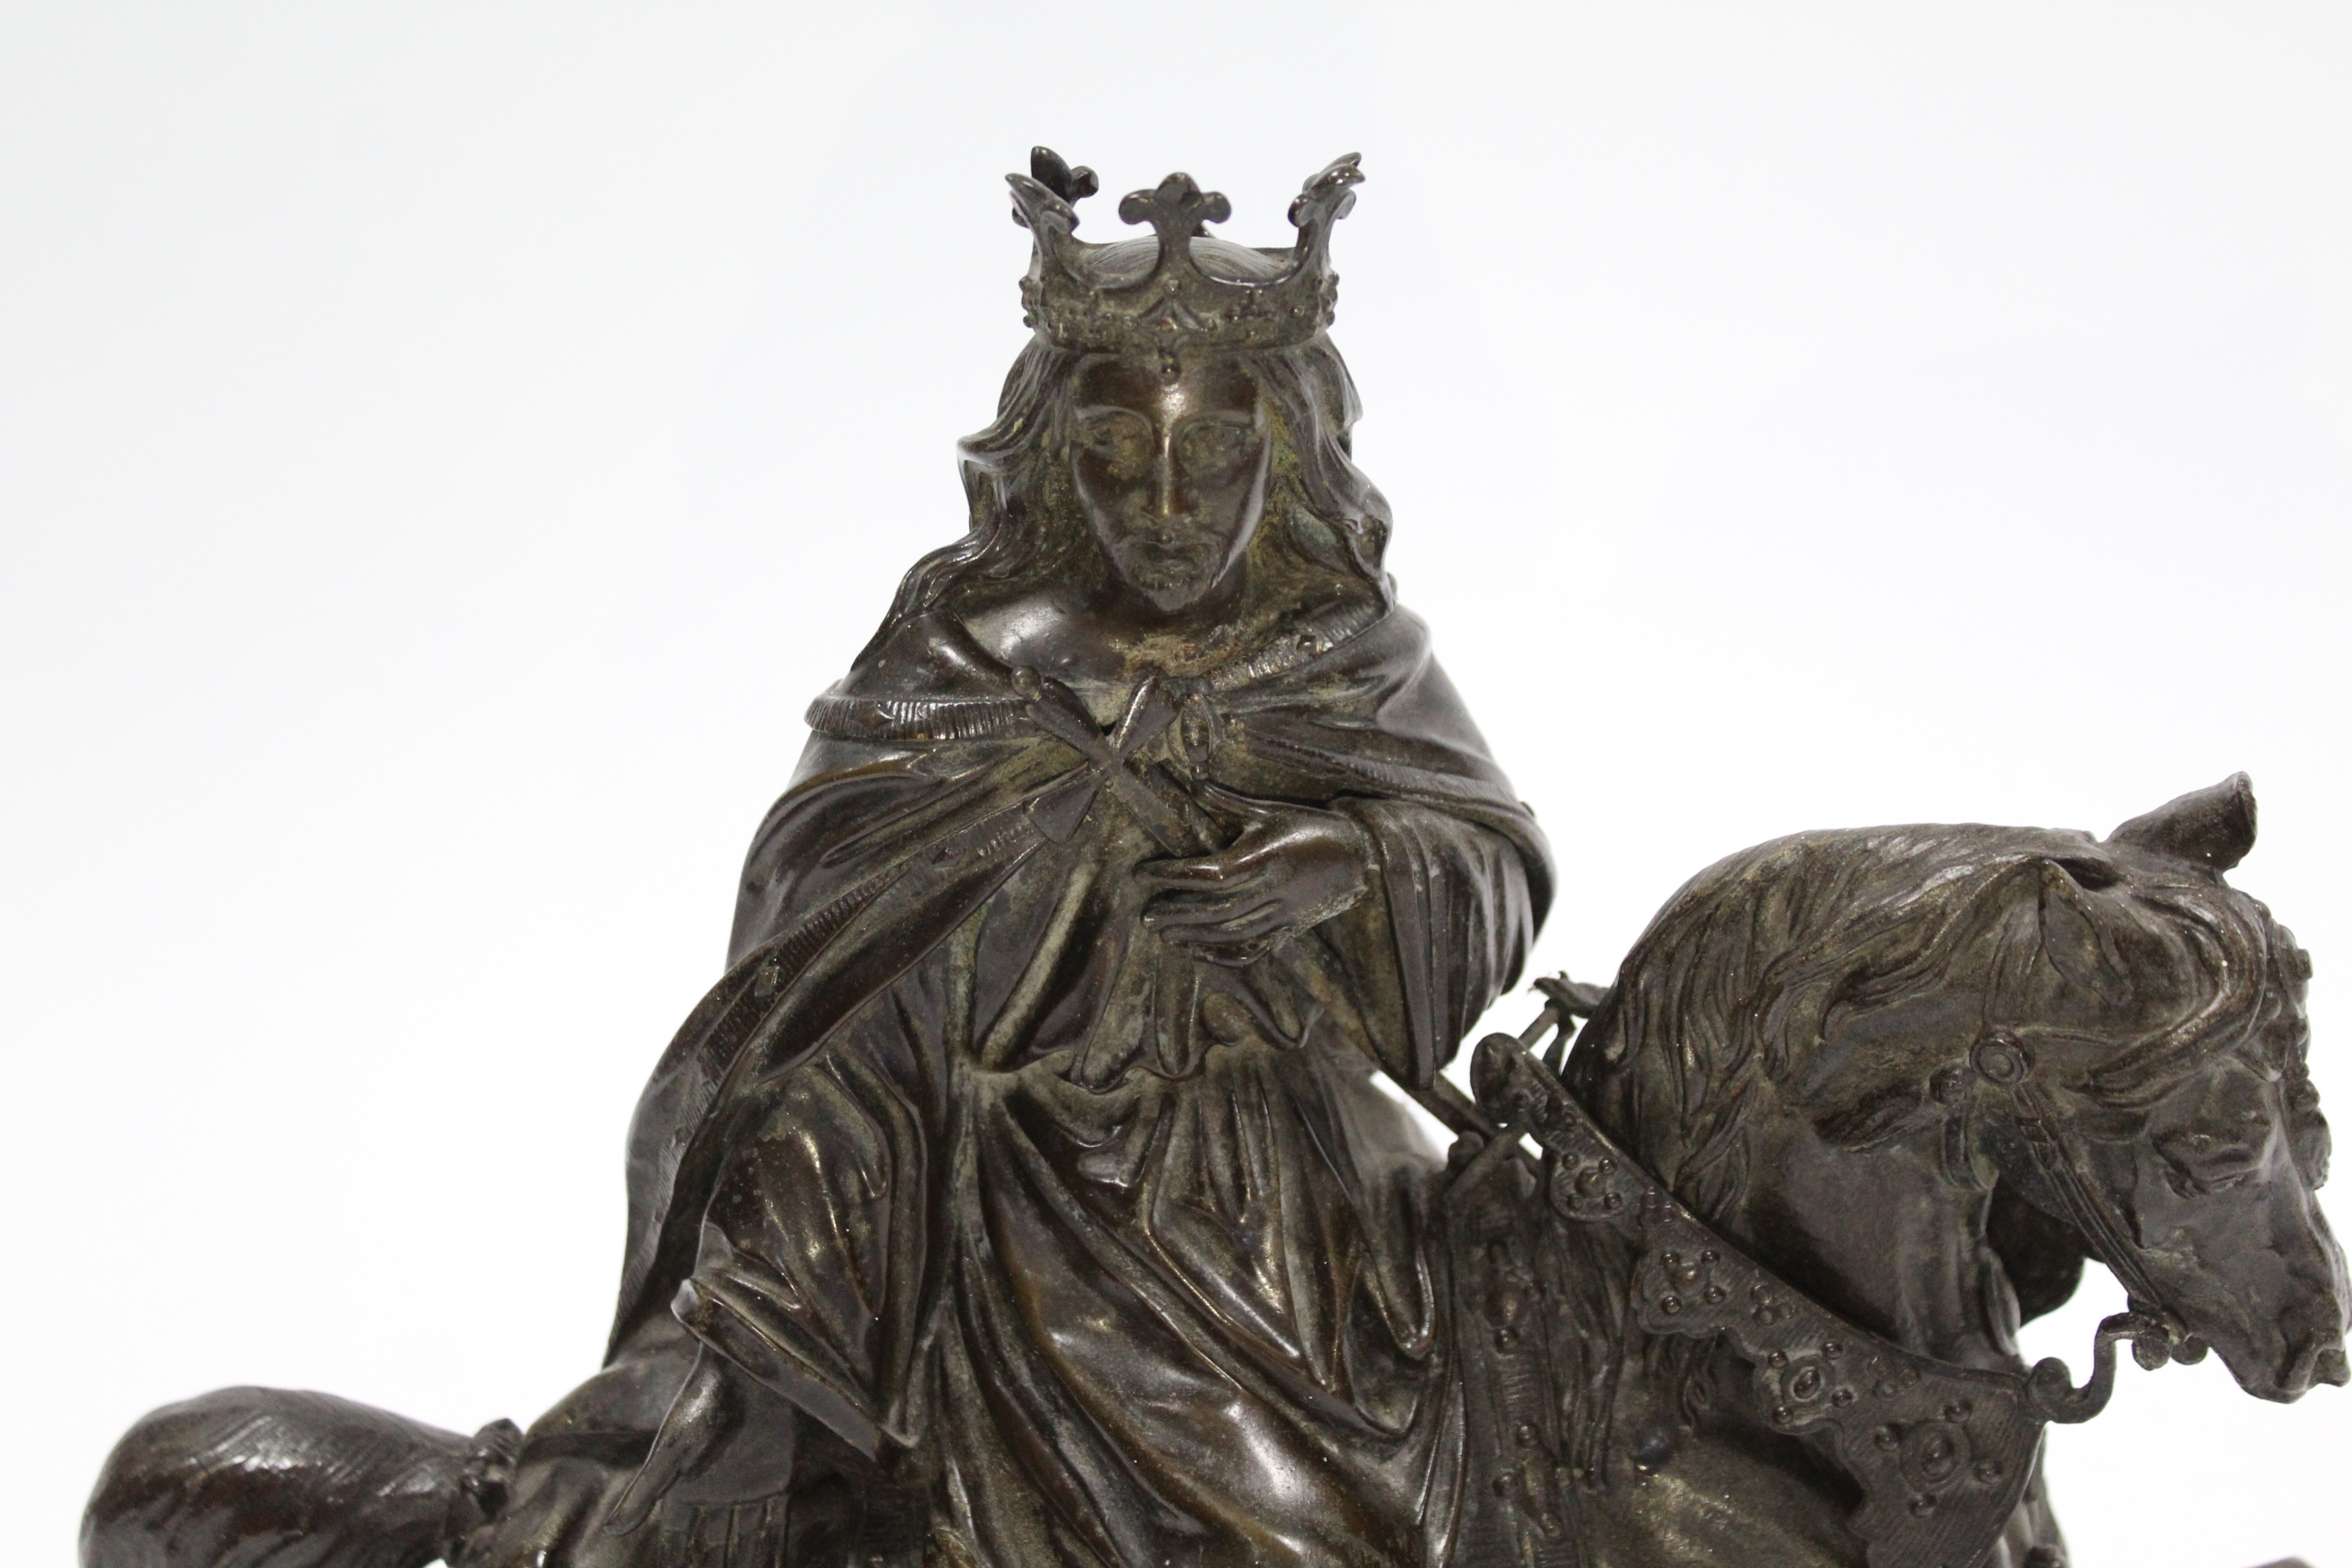 A 19th century BRONZE EQUESTRIAN FIGURE OF A MEDIEVAL KING wearing a crown & with sword in one hand, - Image 2 of 5